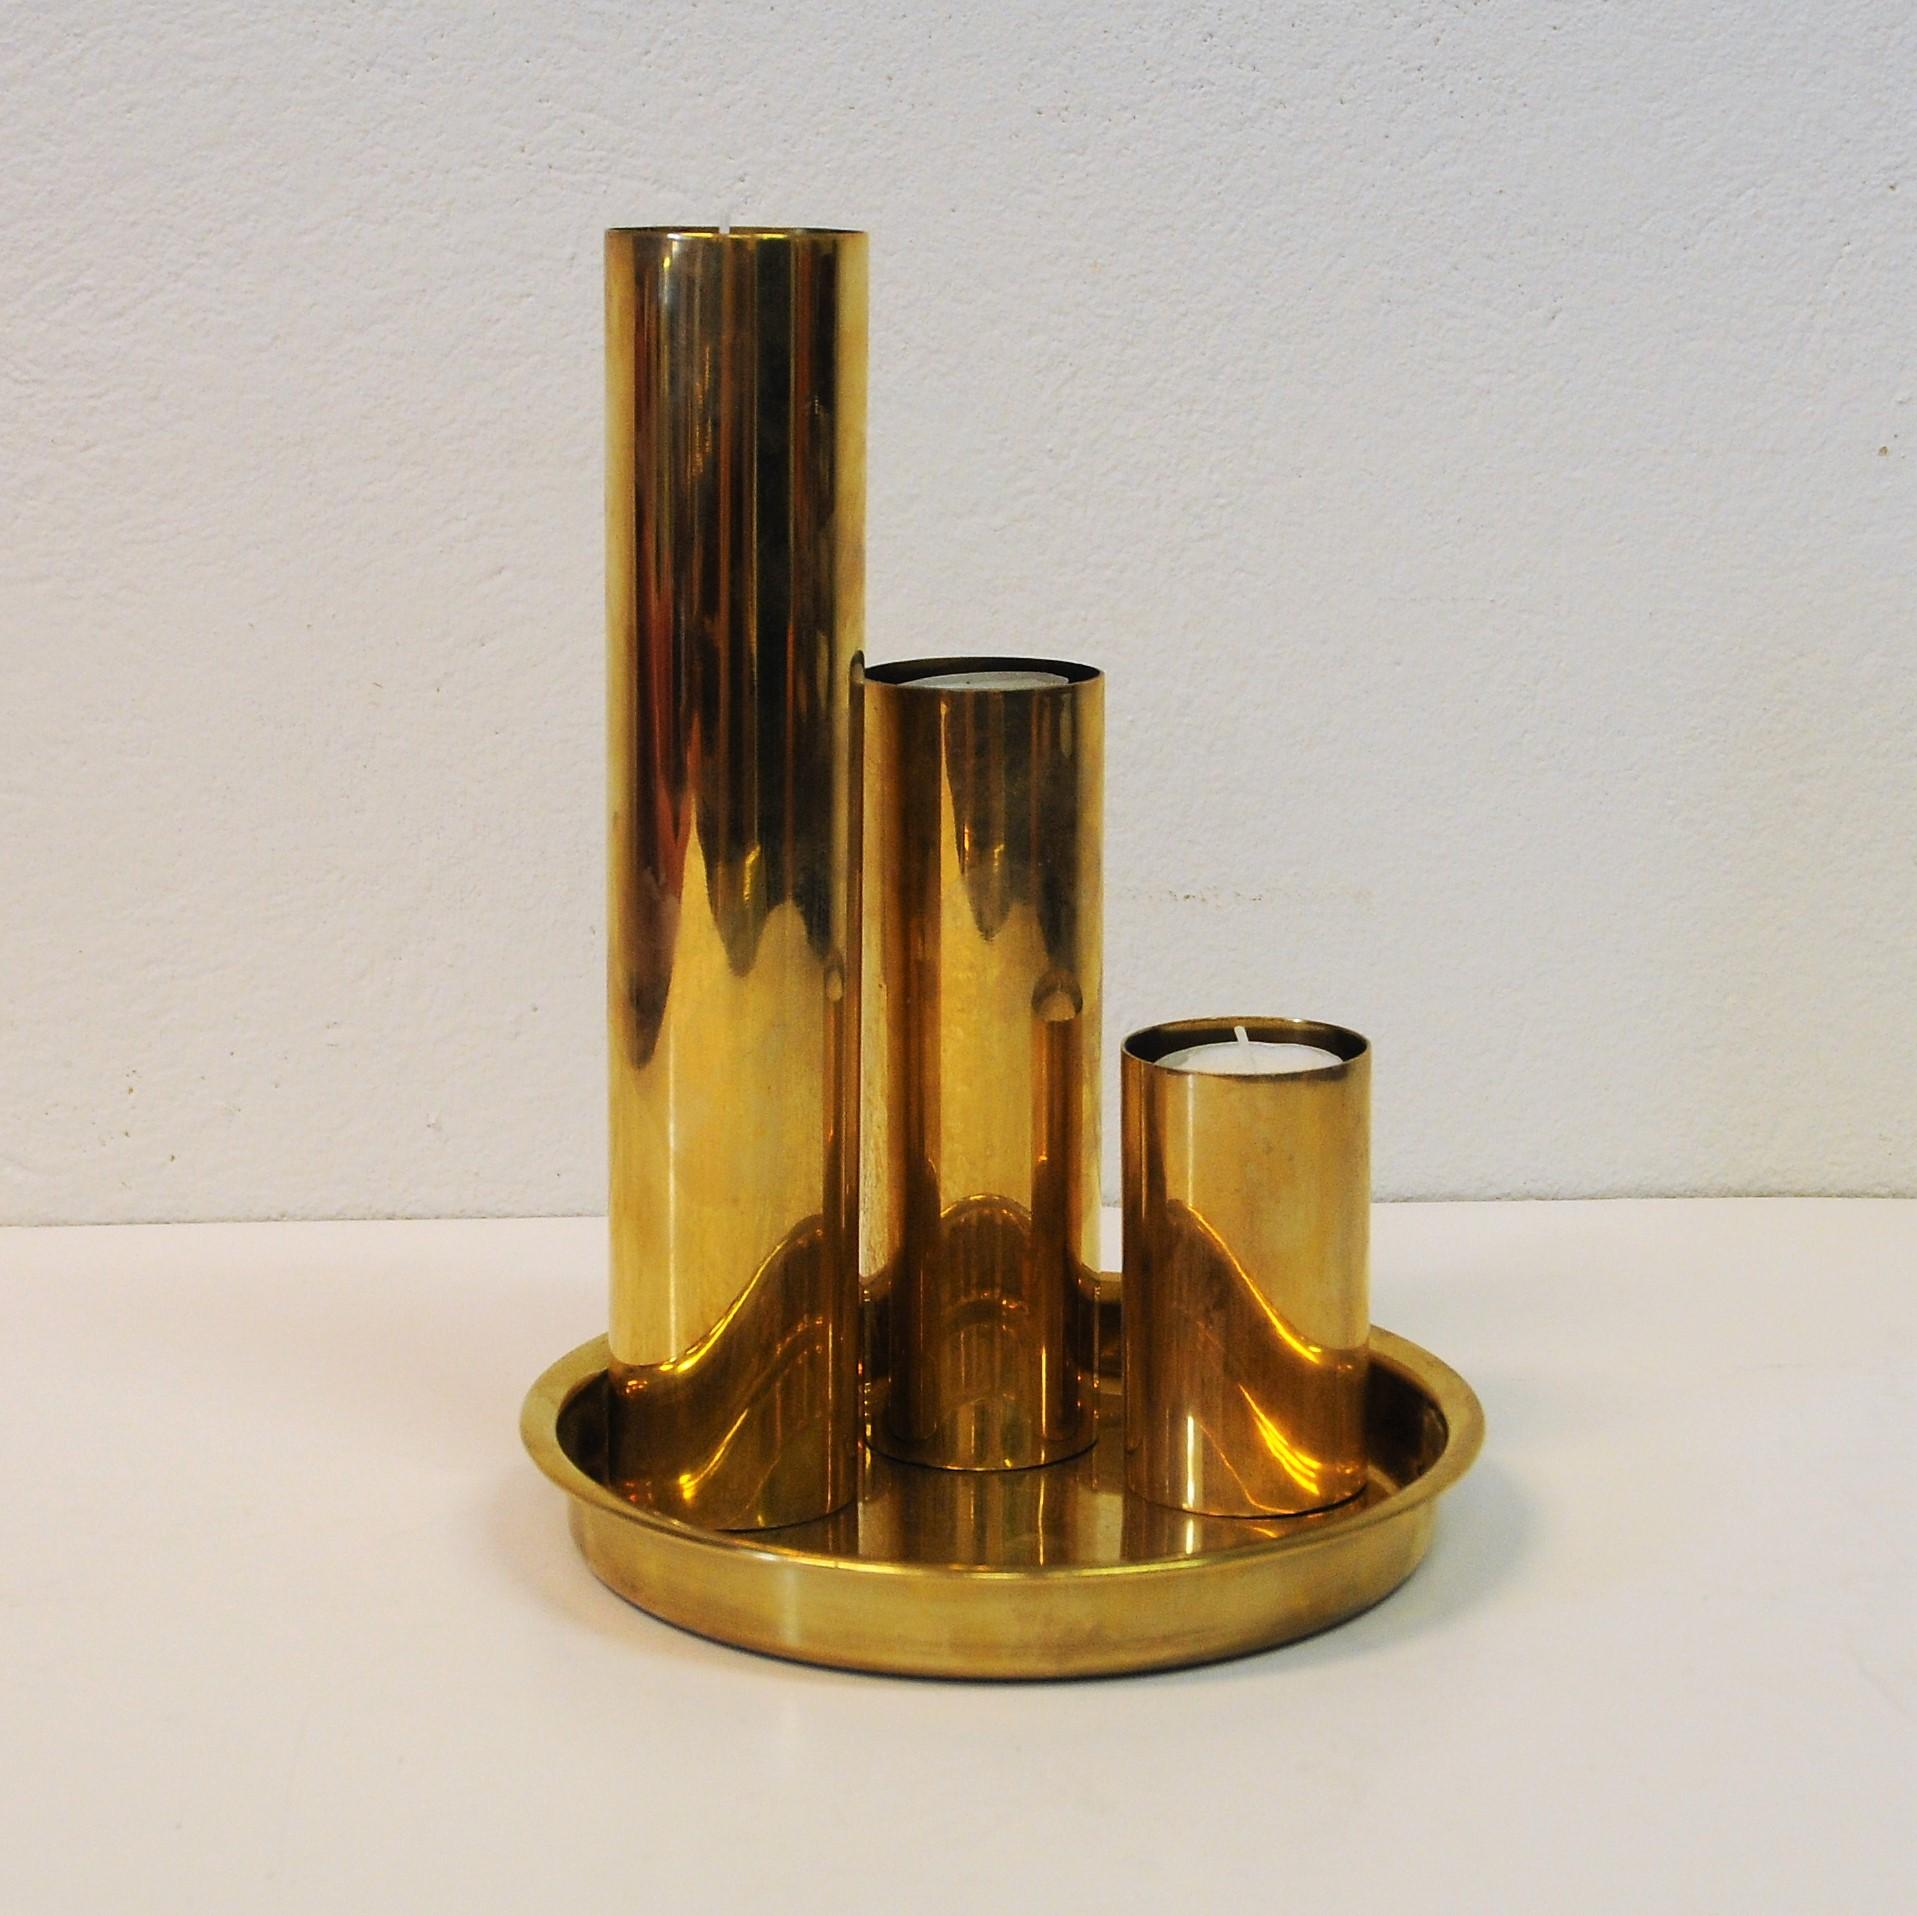 Three attractive and stylish Norwegian brass cylindrical candlesticks or just ornaments/display pieces on a brass-plate. All have same diameter but are in different heights of 25 cm, 16 cm and 9 cm. 5 cm in diameter. The brass plate (19 cm D) has a